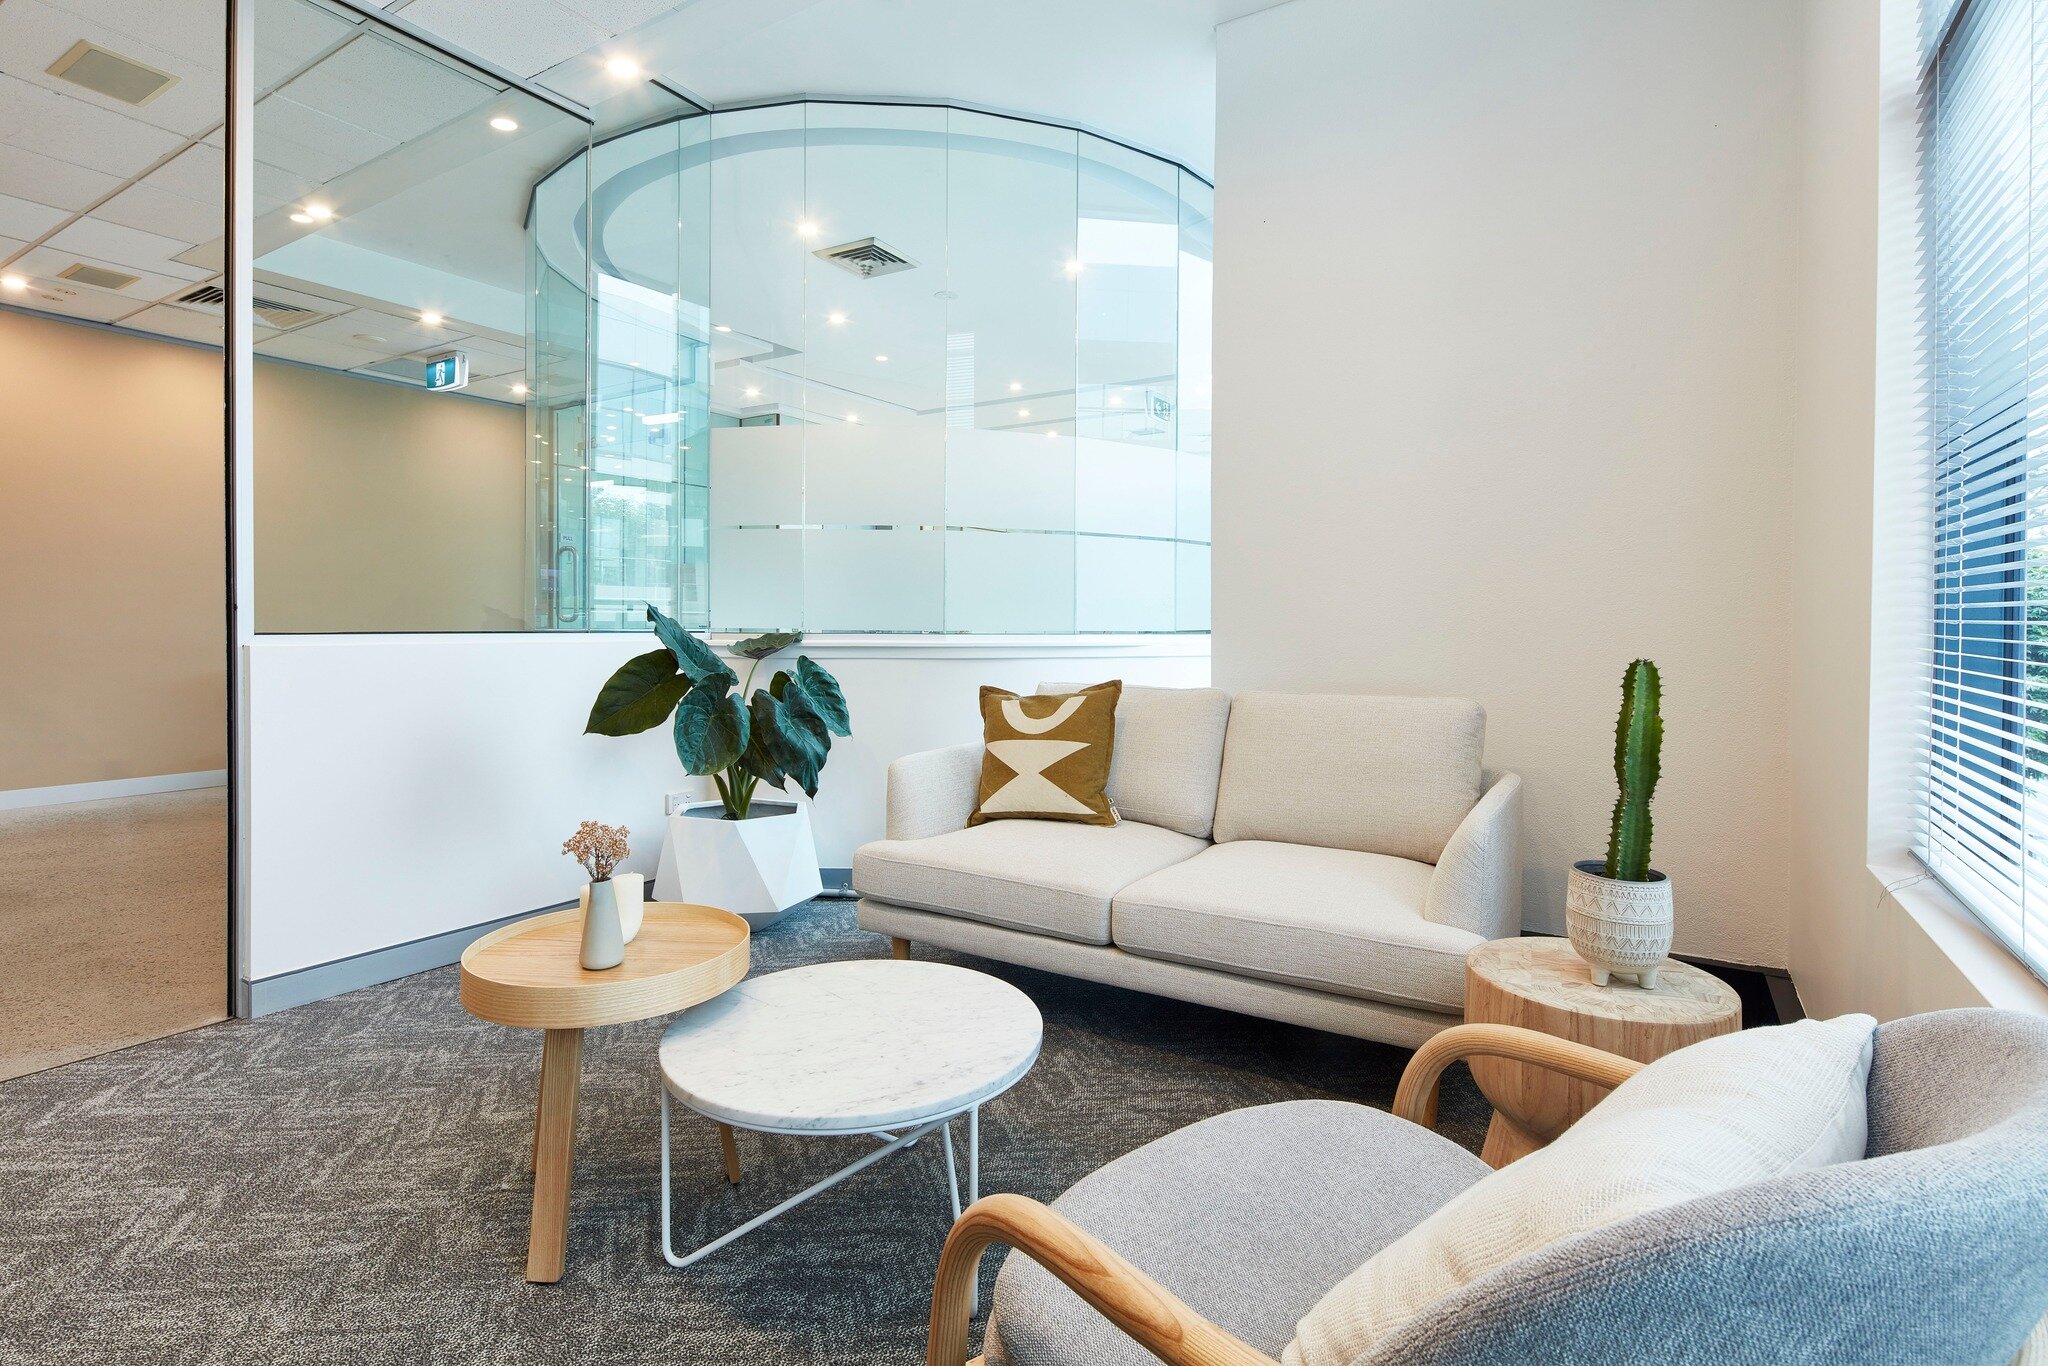 Inspired by natural light, connection, transparency and warmth. Loved working alongside @palmprojectsau redesigning the new @star1045 office space - couldn't be prouder of the result!

#donnamarieinteriors #interiordesign #styling #design #interiors 